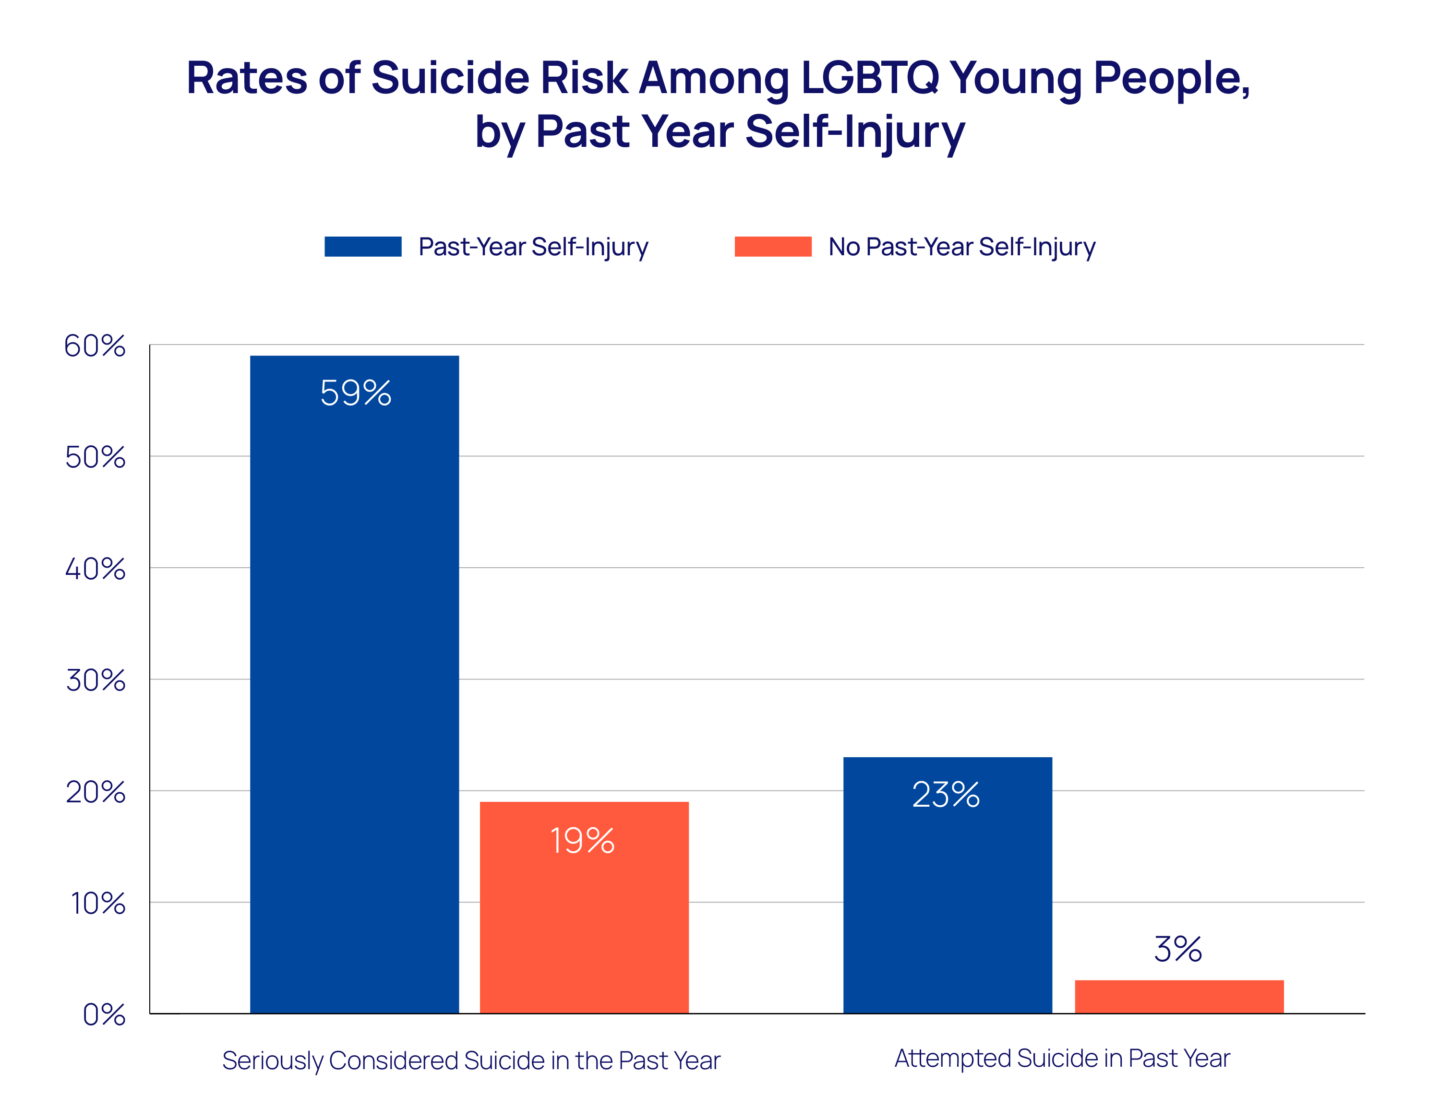 A bar graph showing the suicide risk of LGBTQ young people by past year self-injury. The first set of bars shows 59% of youth who self-injured in the past year seriously considered suicide in the past year compared to 19% of youth with no past-year self-injury. The second set of bars shows 23% of youth who self-injured in the past year attempted suicide in the past year compared to 3% of youth with no past-year self-injury.